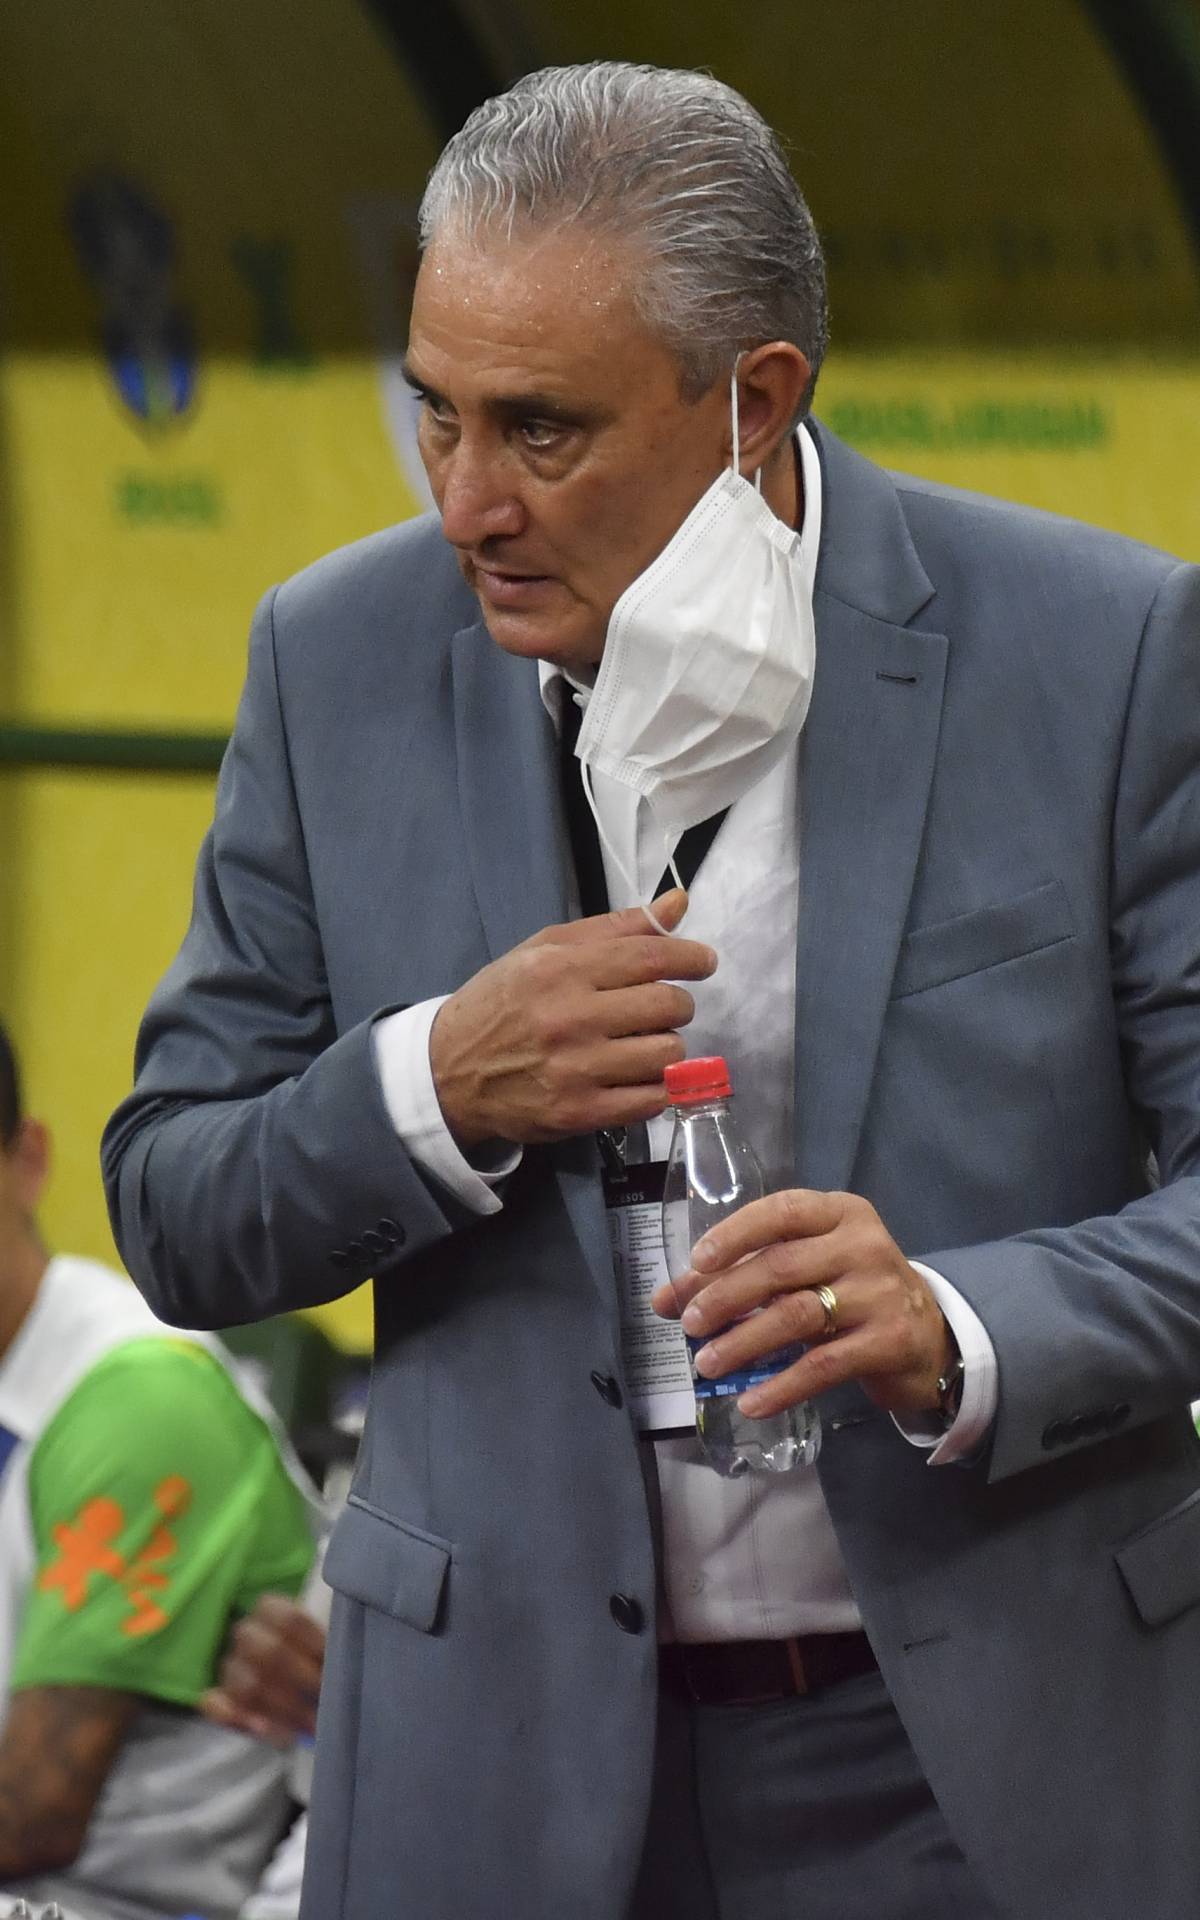 Brazil's coach Tite gestures during the South American qualification football match against Uruguay for the FIFA World Cup Qatar 2022, in Arena Amazonia, Manaus, Brazil, on October 14, 2021. (Photo by NELSON ALMEIDA / AFP) - AFP